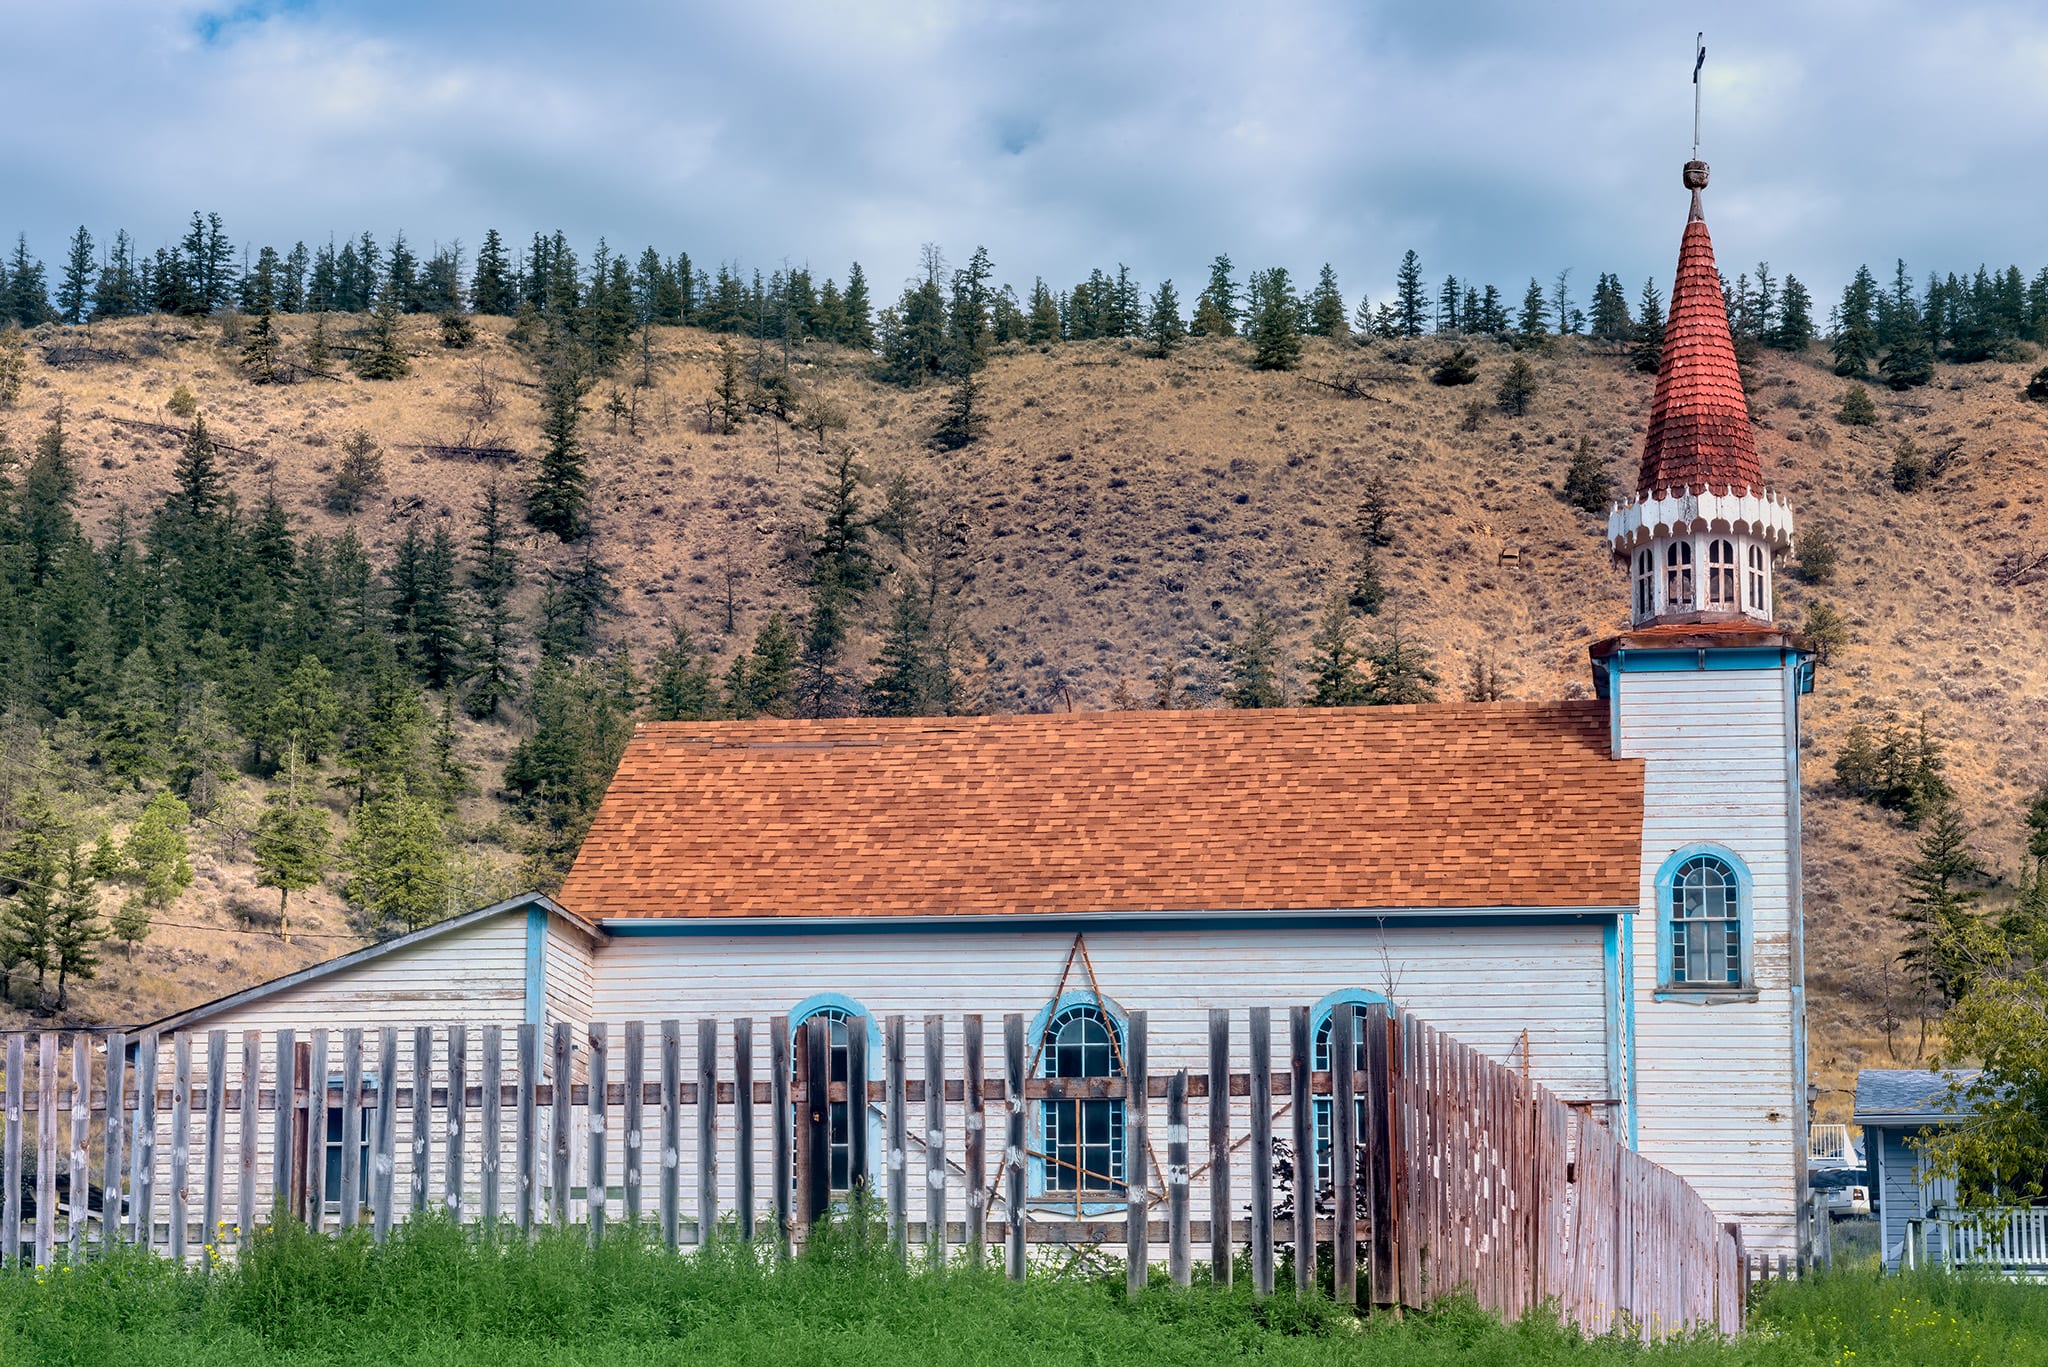 Holy Trinity Church at Pavilion, home to the Ts'kw'aylaxw First Nation, British Columbia, Canada.